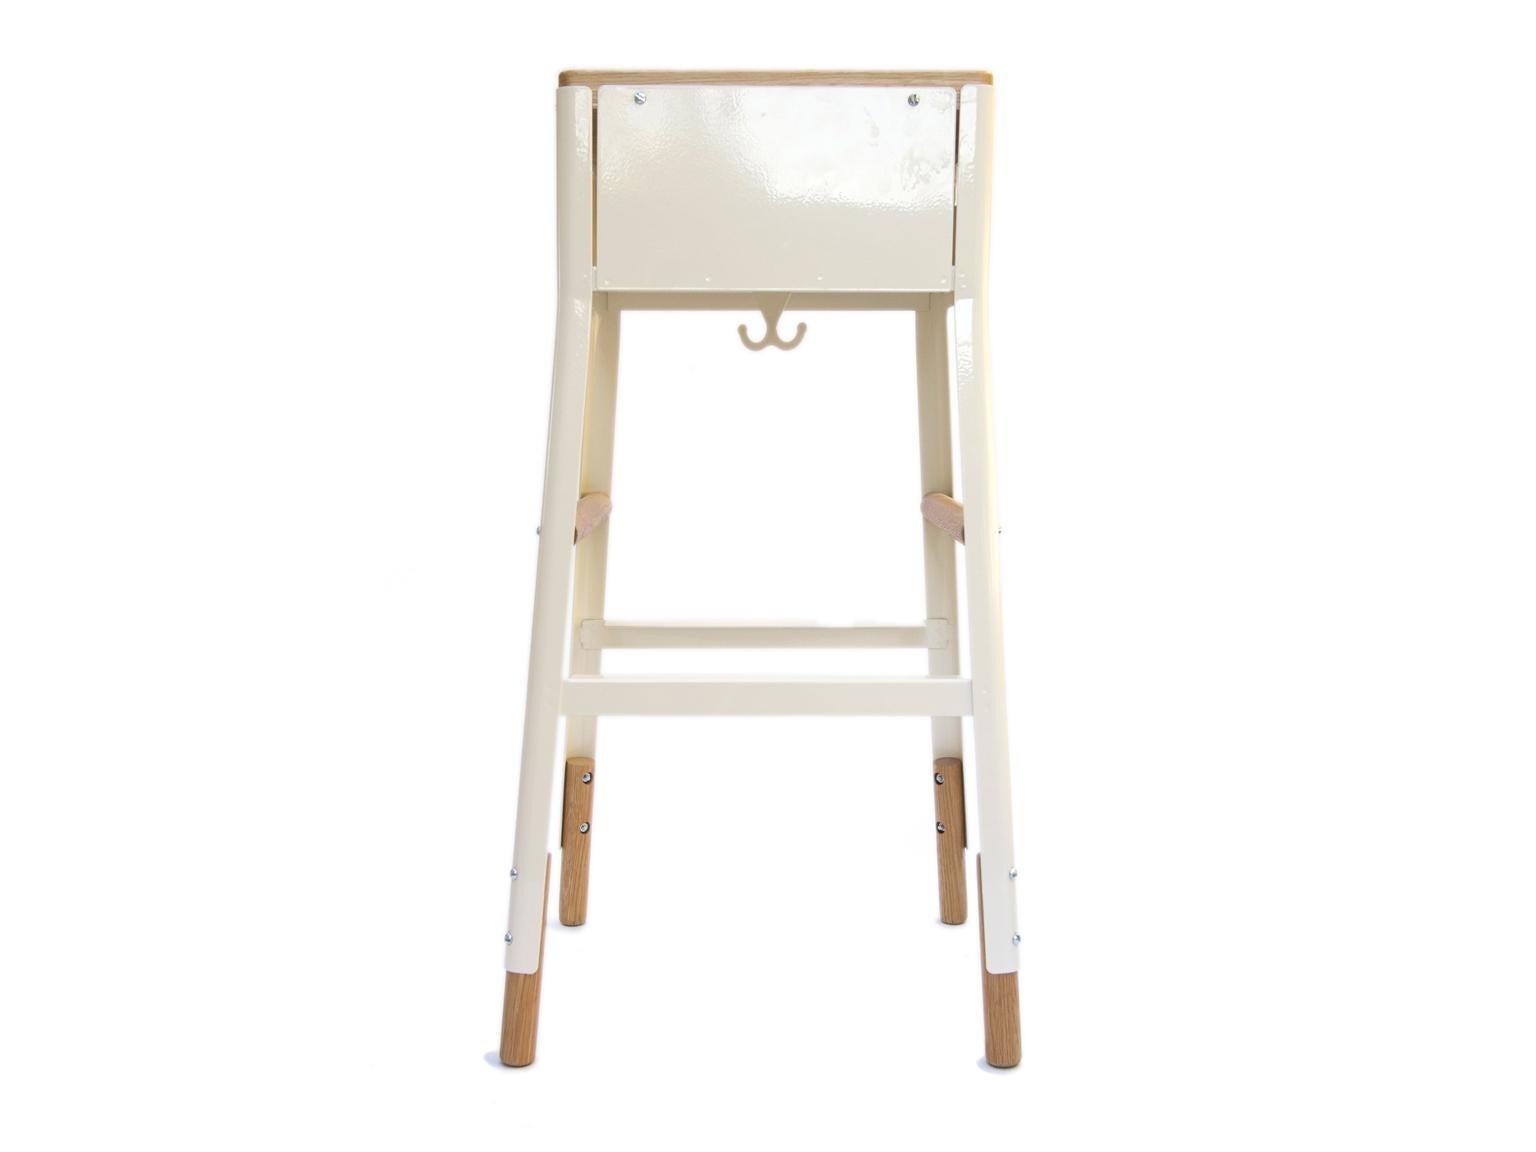 Hand-Crafted Powder Coated Steel & White Oak bar stool with cubby - 30